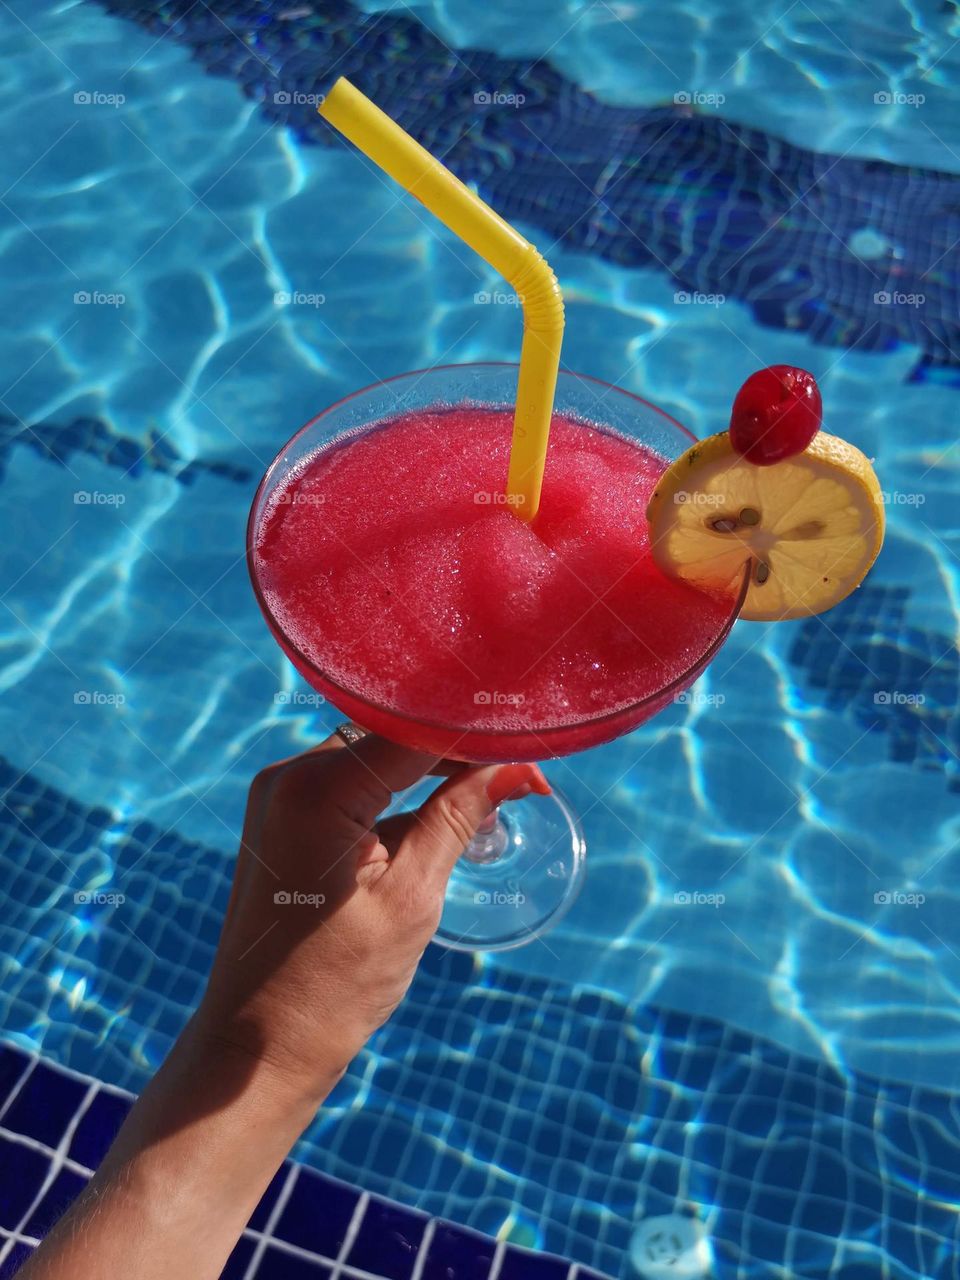 Liquids are cool. Tasty cocktails. Summer time, summer mood. Relax in a swimming pool.